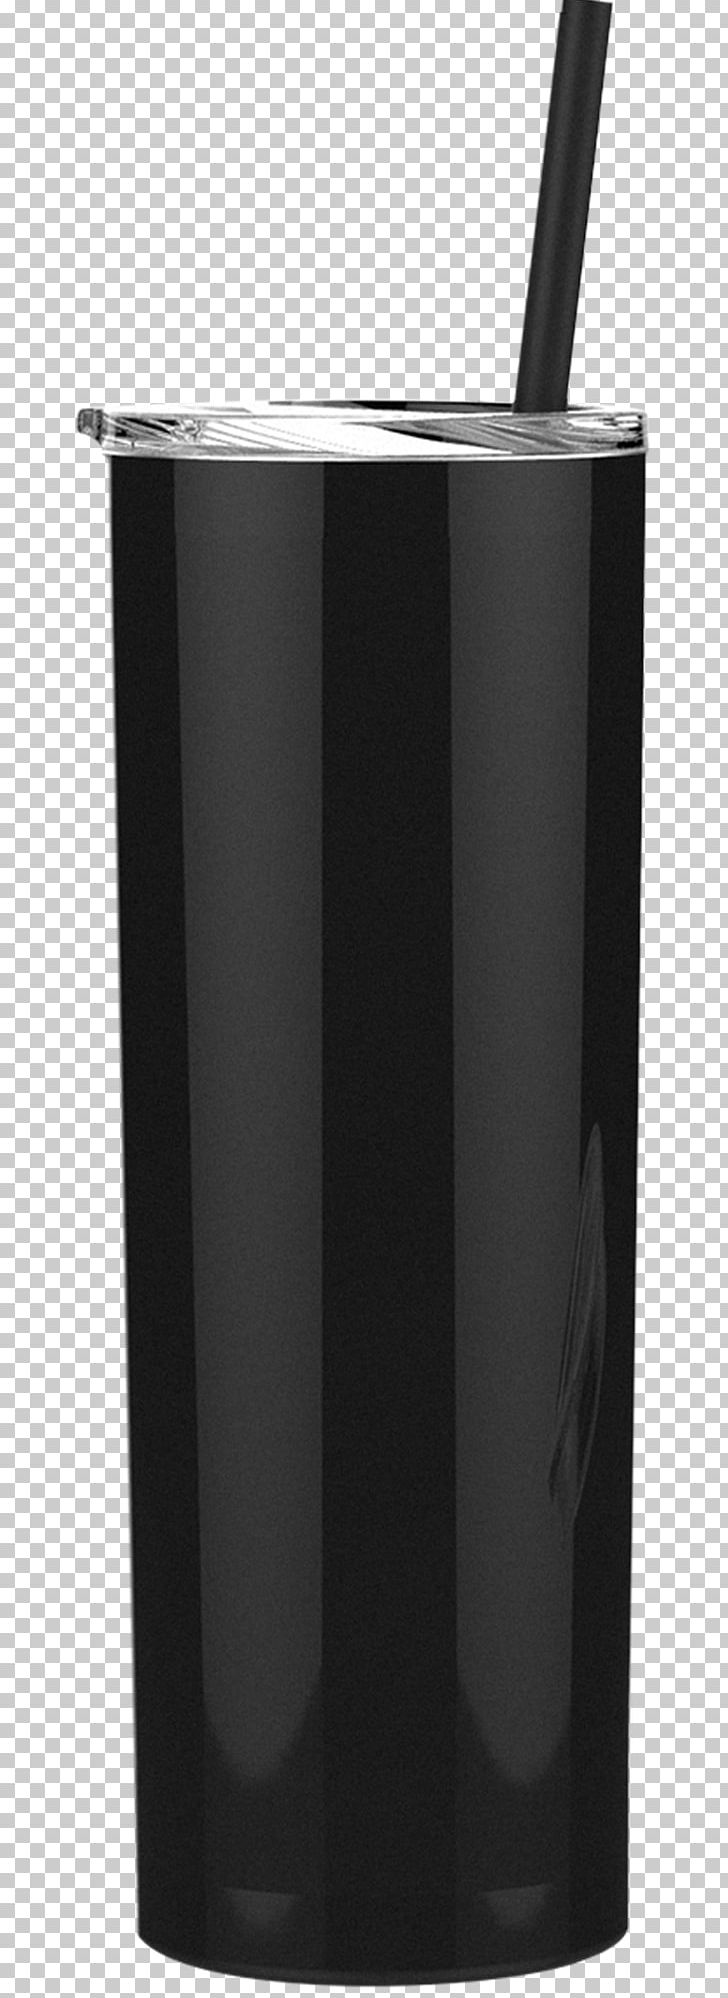 Tumbler Coffee Cup Fizzy Drinks Drinking Straw PNG, Clipart, Black, Blank Cosmetic Bottles, Coffee Cup, Cup, Cylinder Free PNG Download